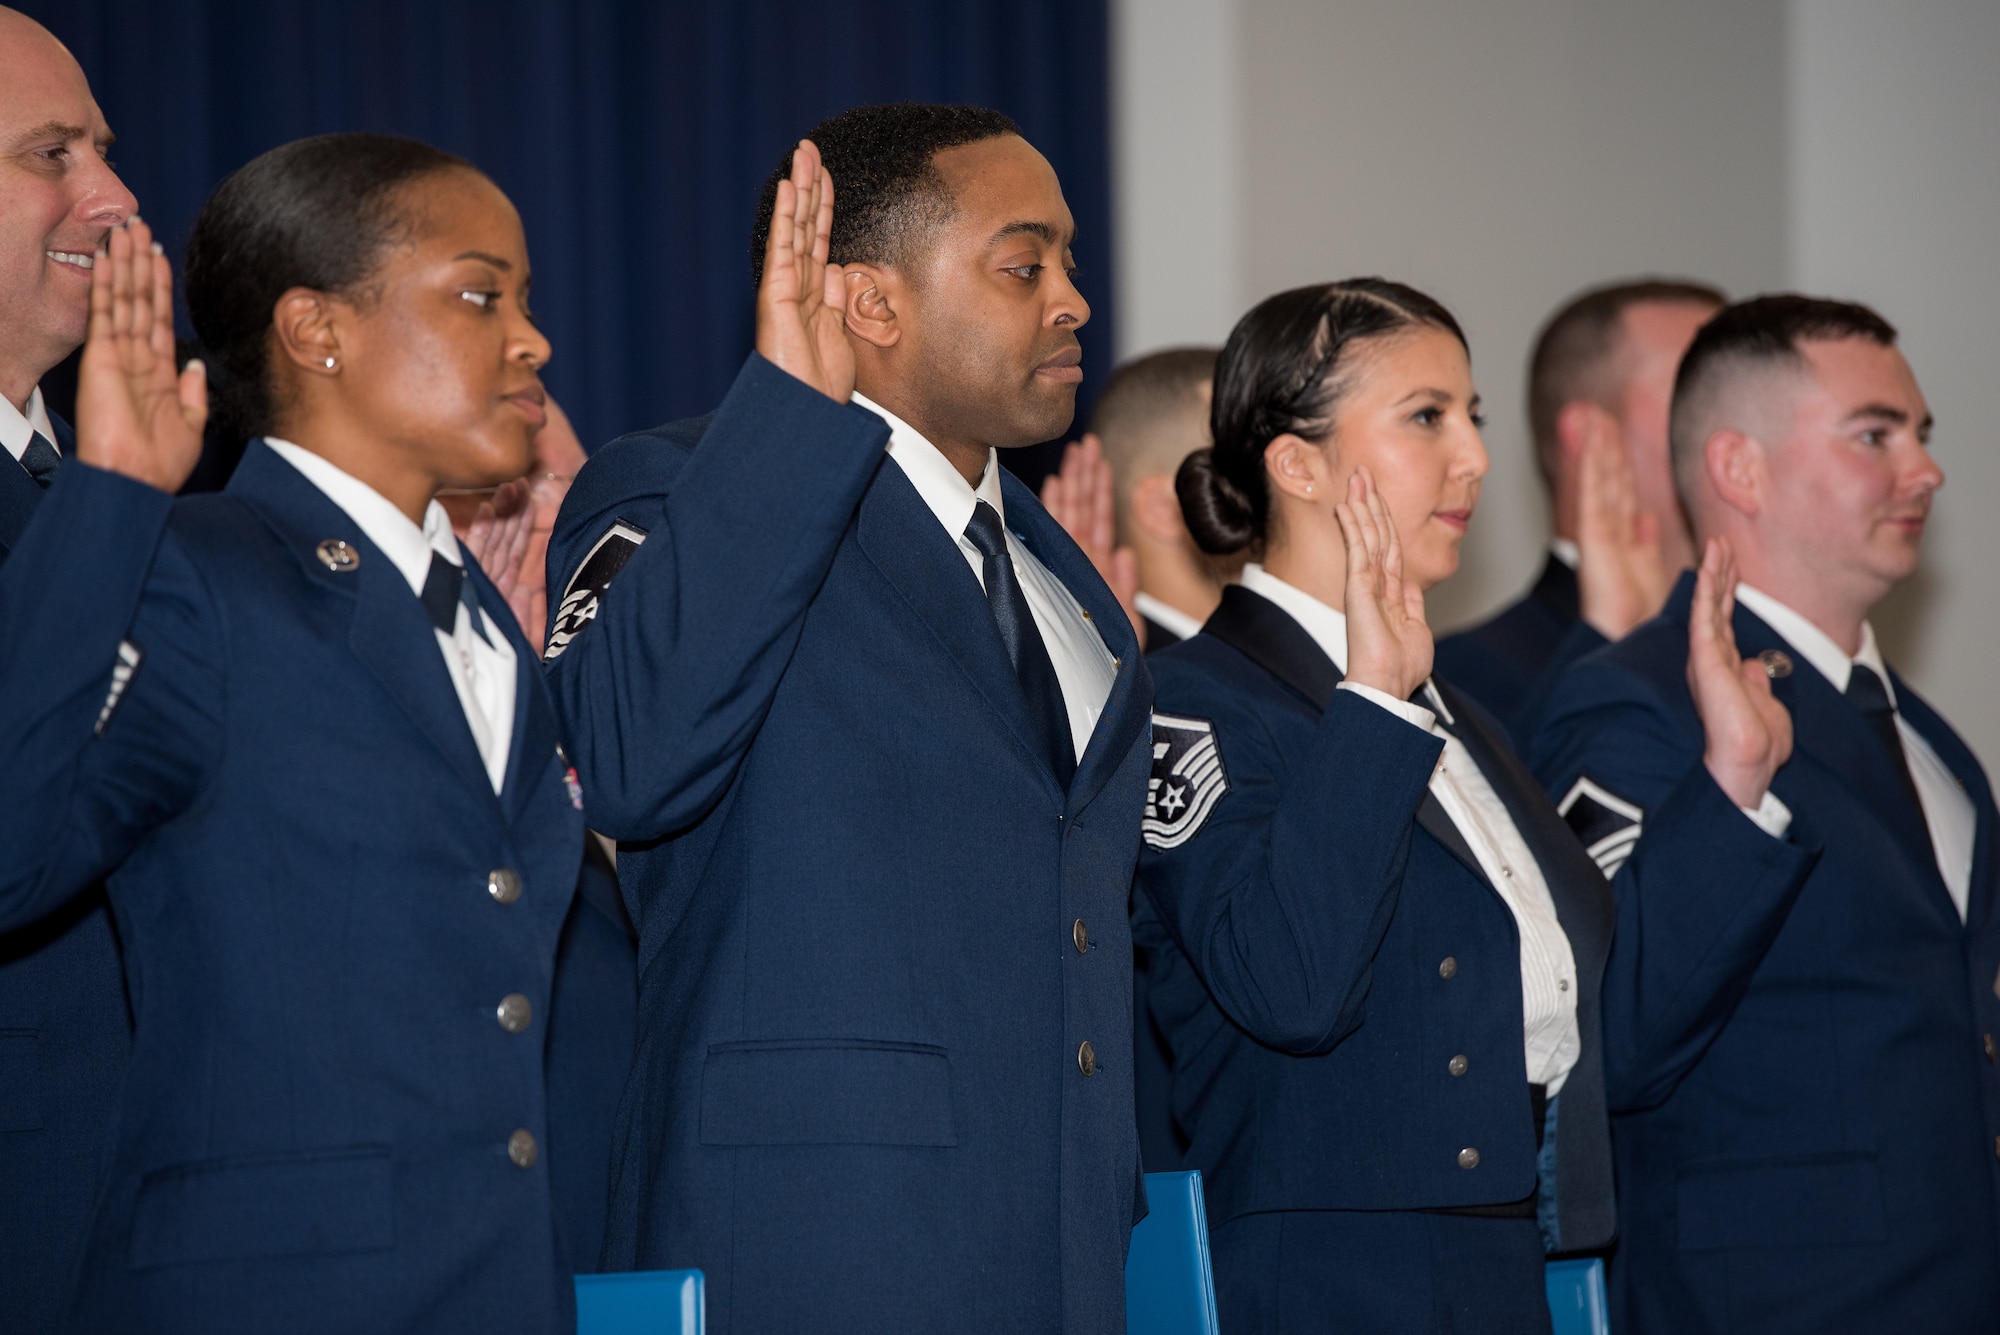 Airmen from the 512th Airlift Wing raise their right hands during a senior non-commissioned officer induction ceremony held at The Landings in Dover, Delaware, May 18, 2019. Thirty-two newly promoted master sergeants were charged with new responsibilities as they accepted the role within their new rank. (U.S. Air Force photo by Staff Sgt. Damien Taylor)